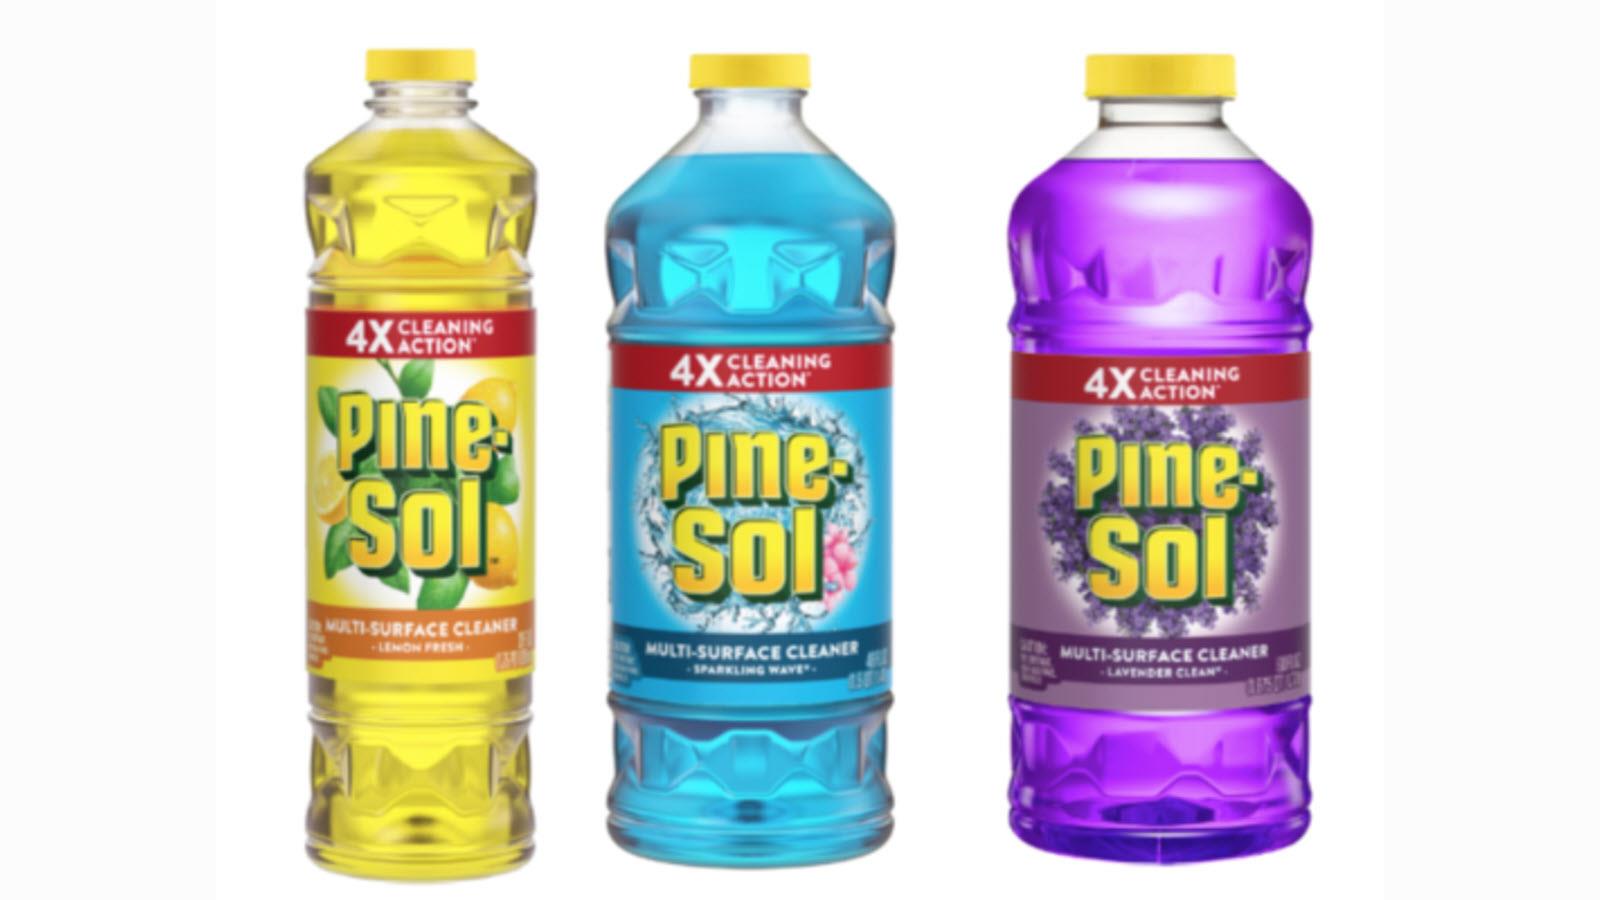 Three varieties of Pine Sol cleaning liquid in yellow, blue and purple